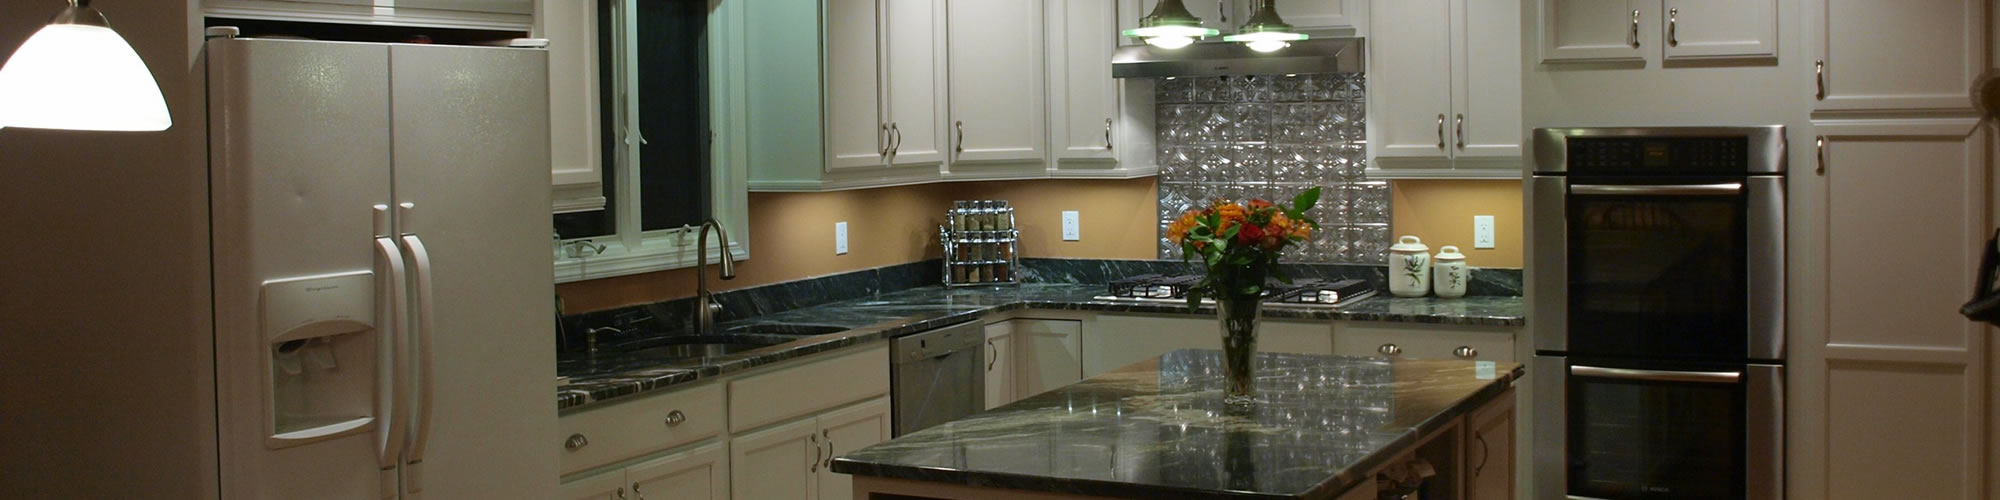 Lighting and Fixtures - Saint Louis Remodeling